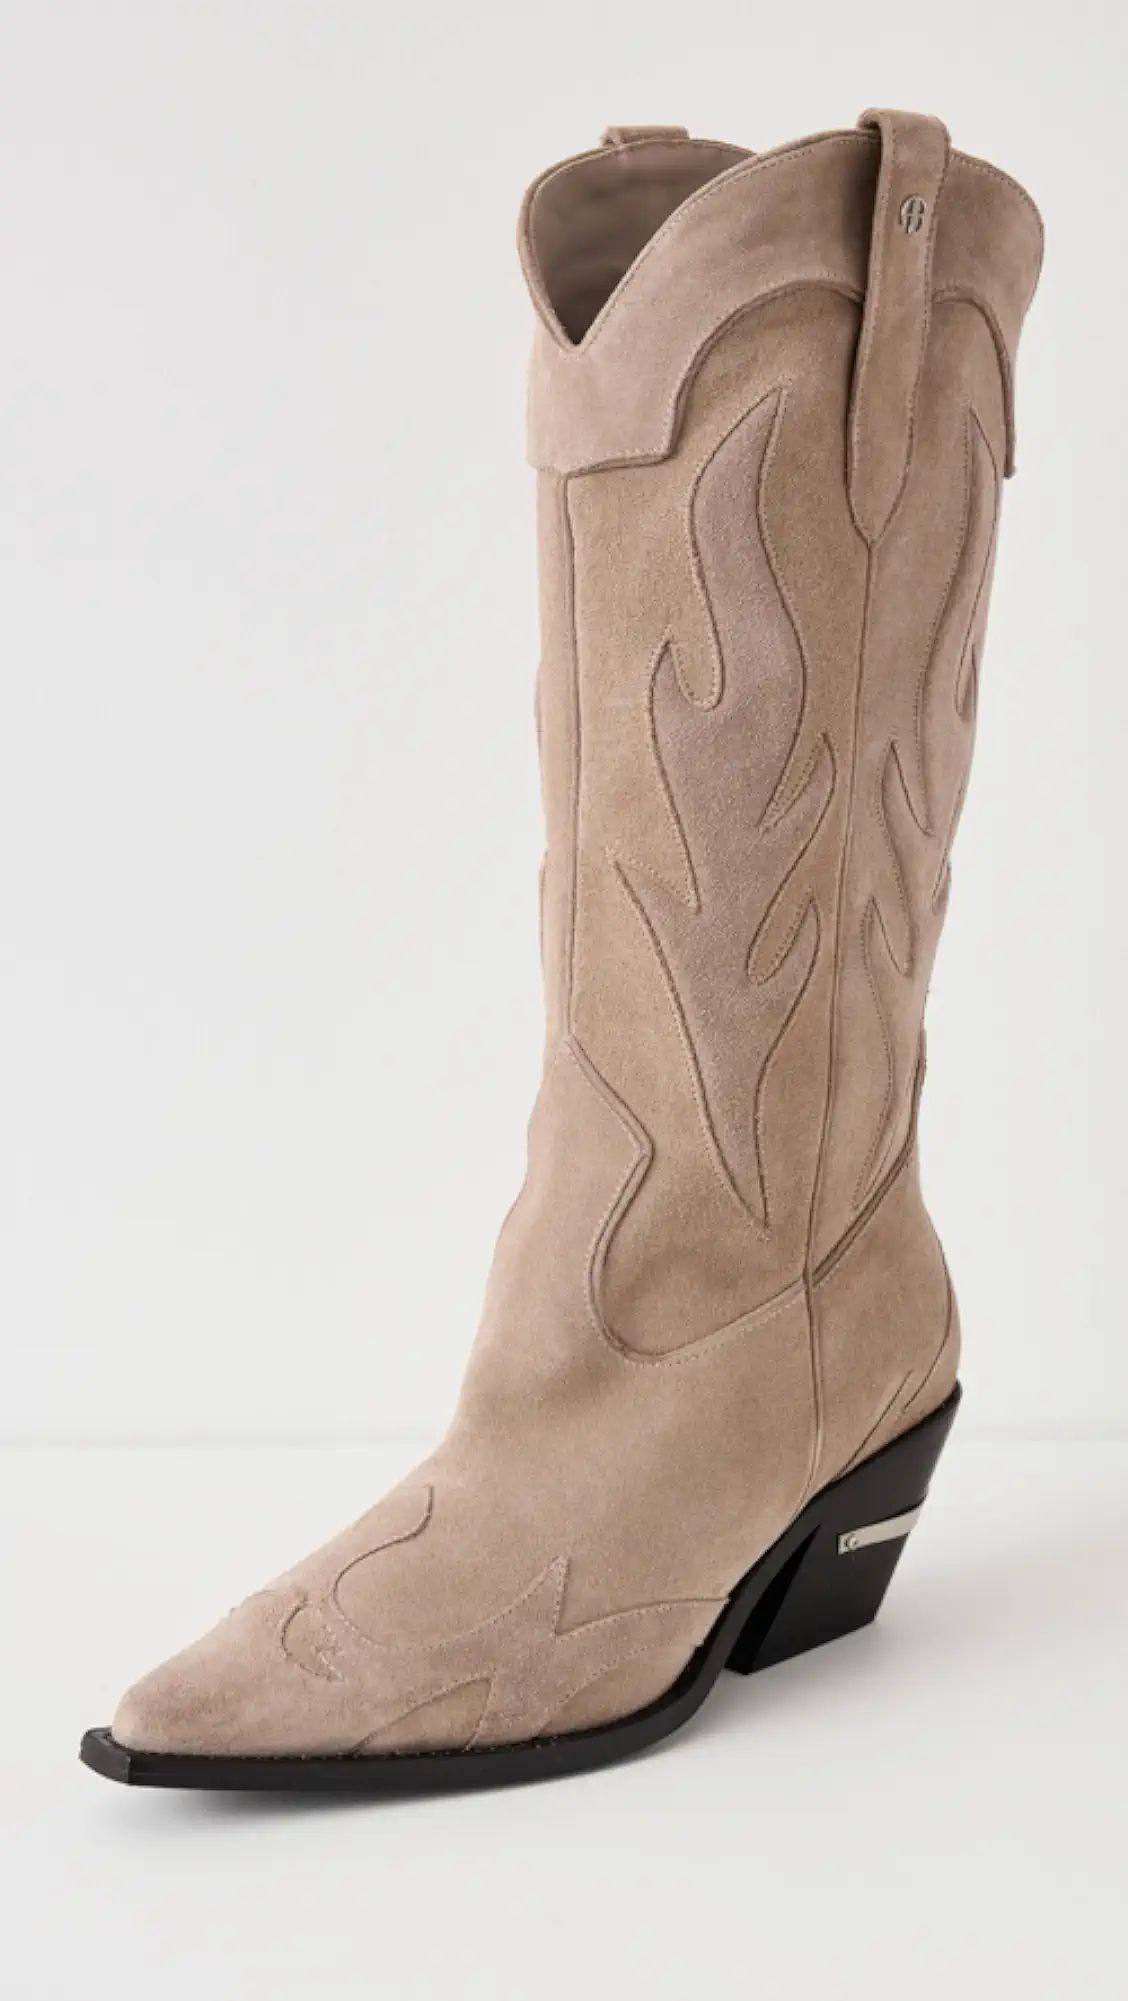 ANINE BING Mid Calf Tania Boots - Taupe Western | Shopbop | Shopbop